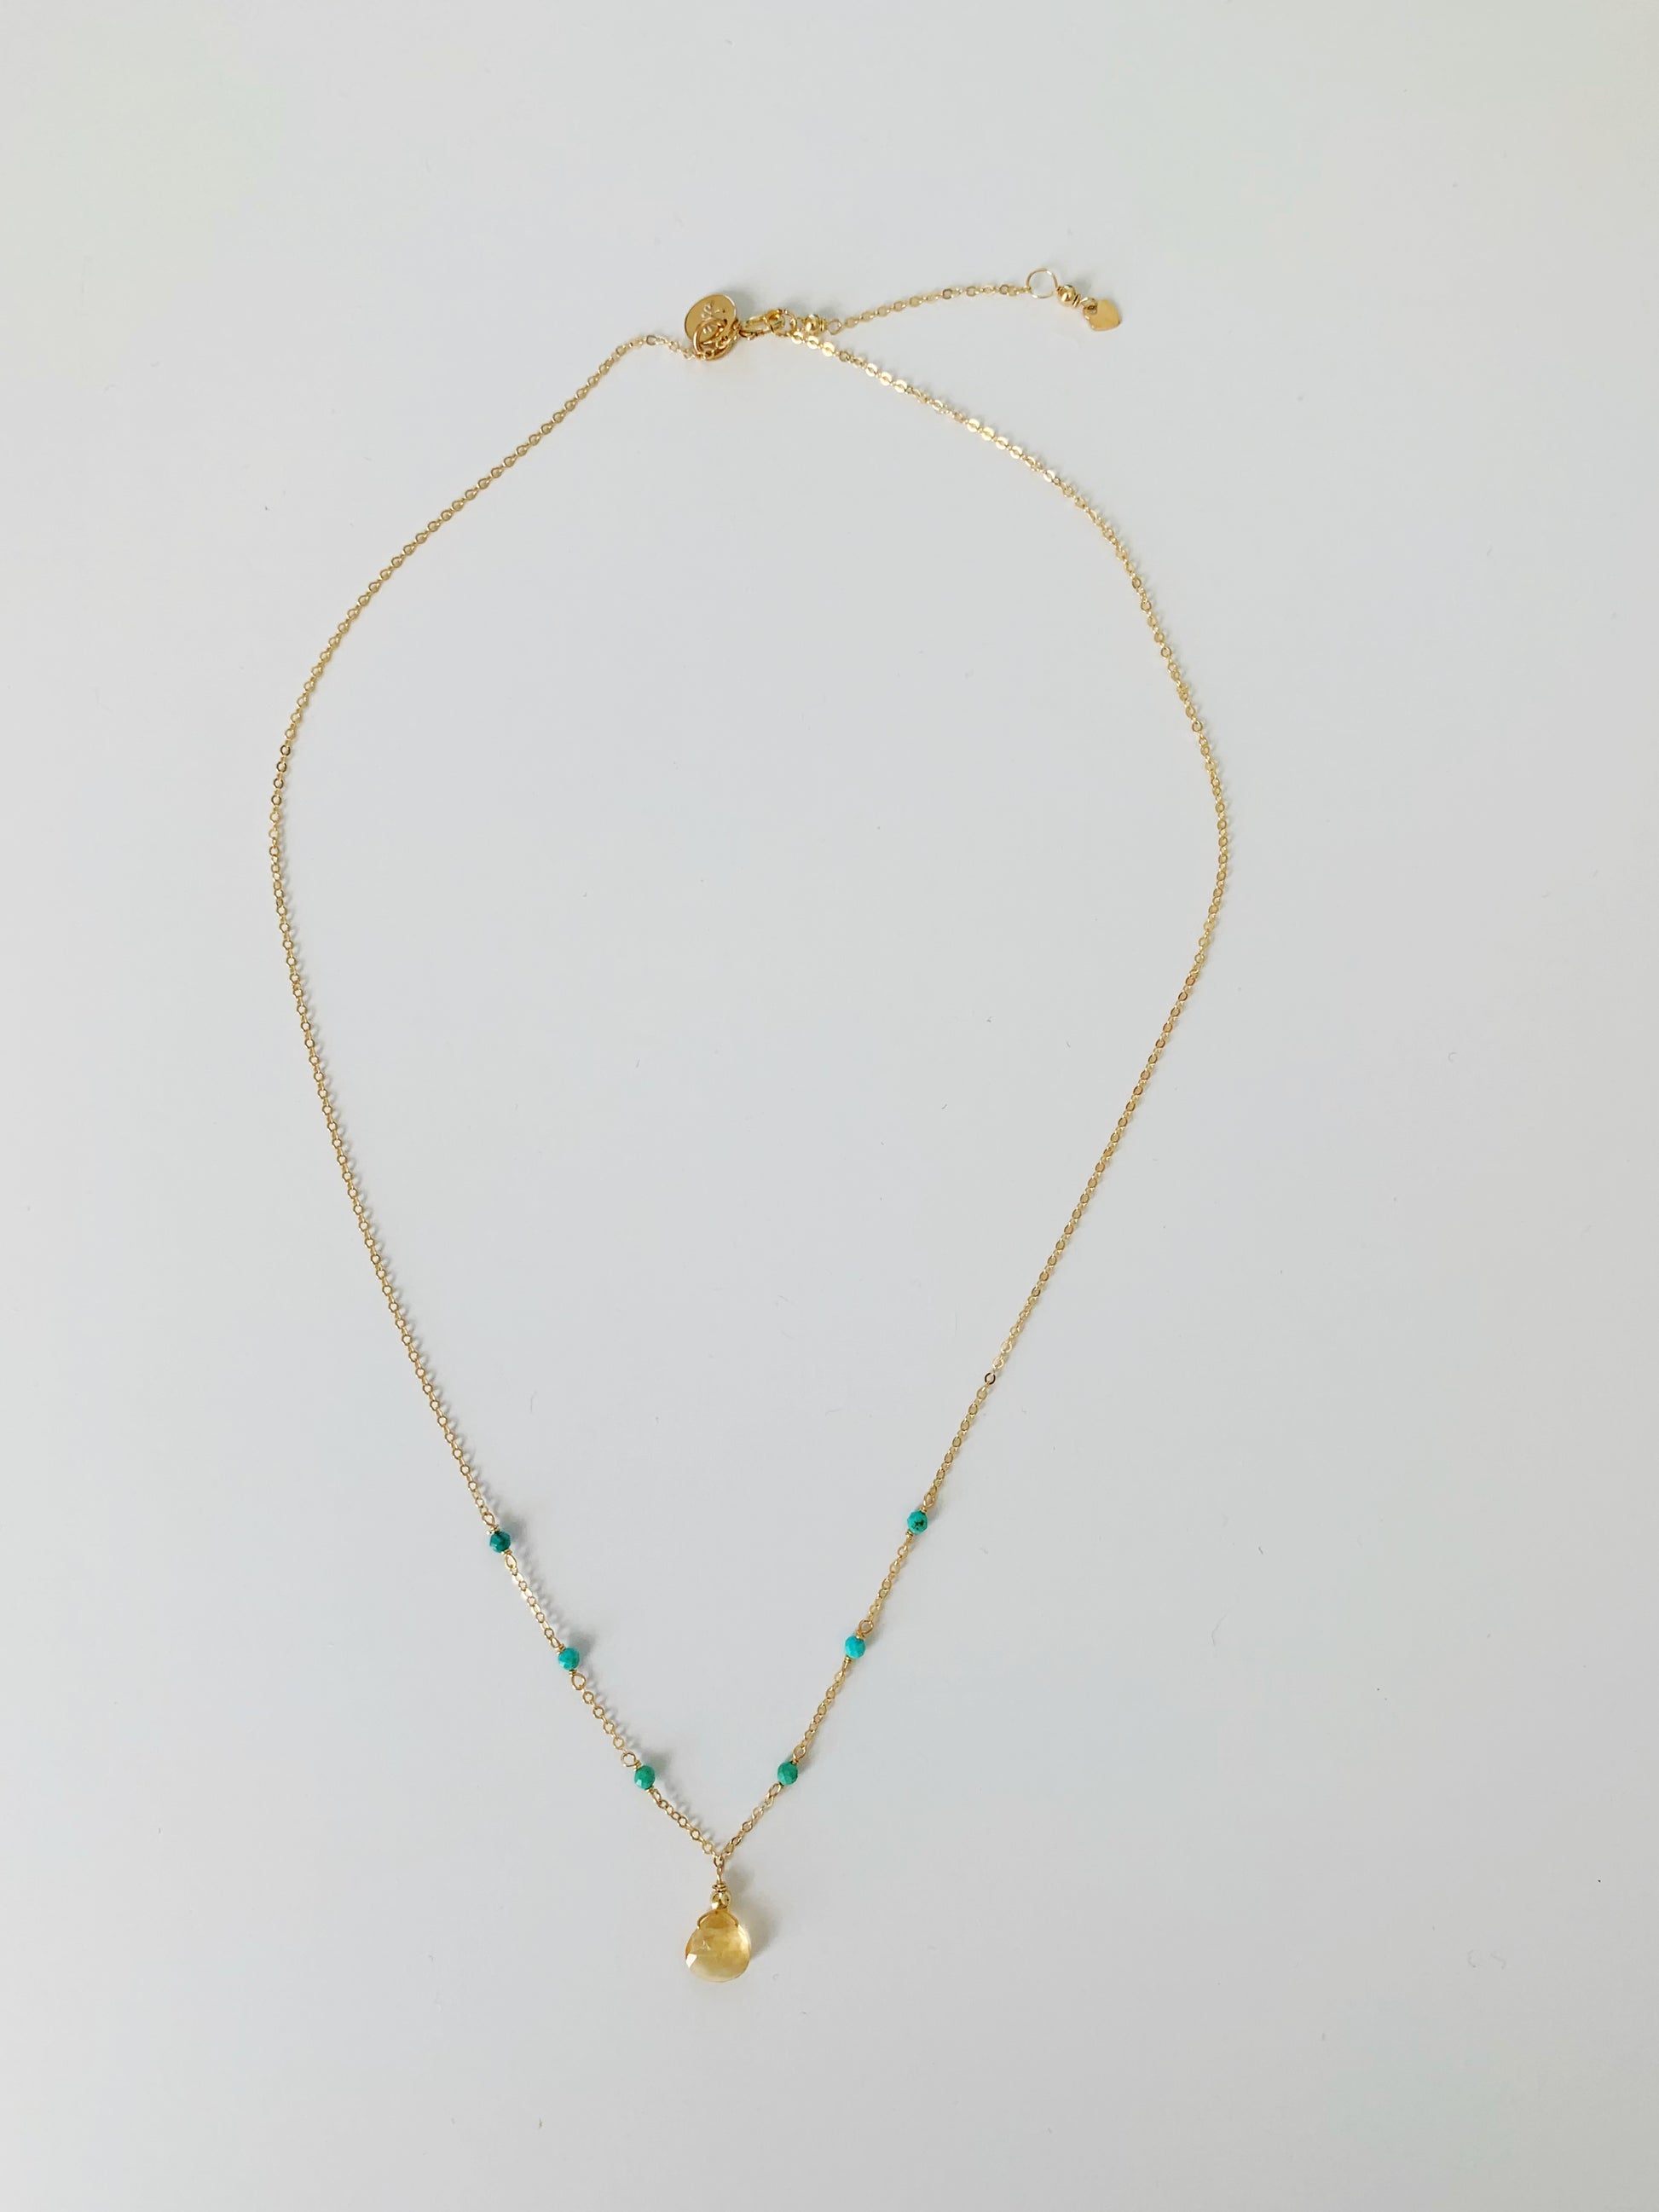 Ray of Sunshine necklace by mermaids and madeleines as a citrine drop at the center with natural turquoise beads on 14k gold filled chain. This is an image of the full length of the necklace and pictured on a white surface